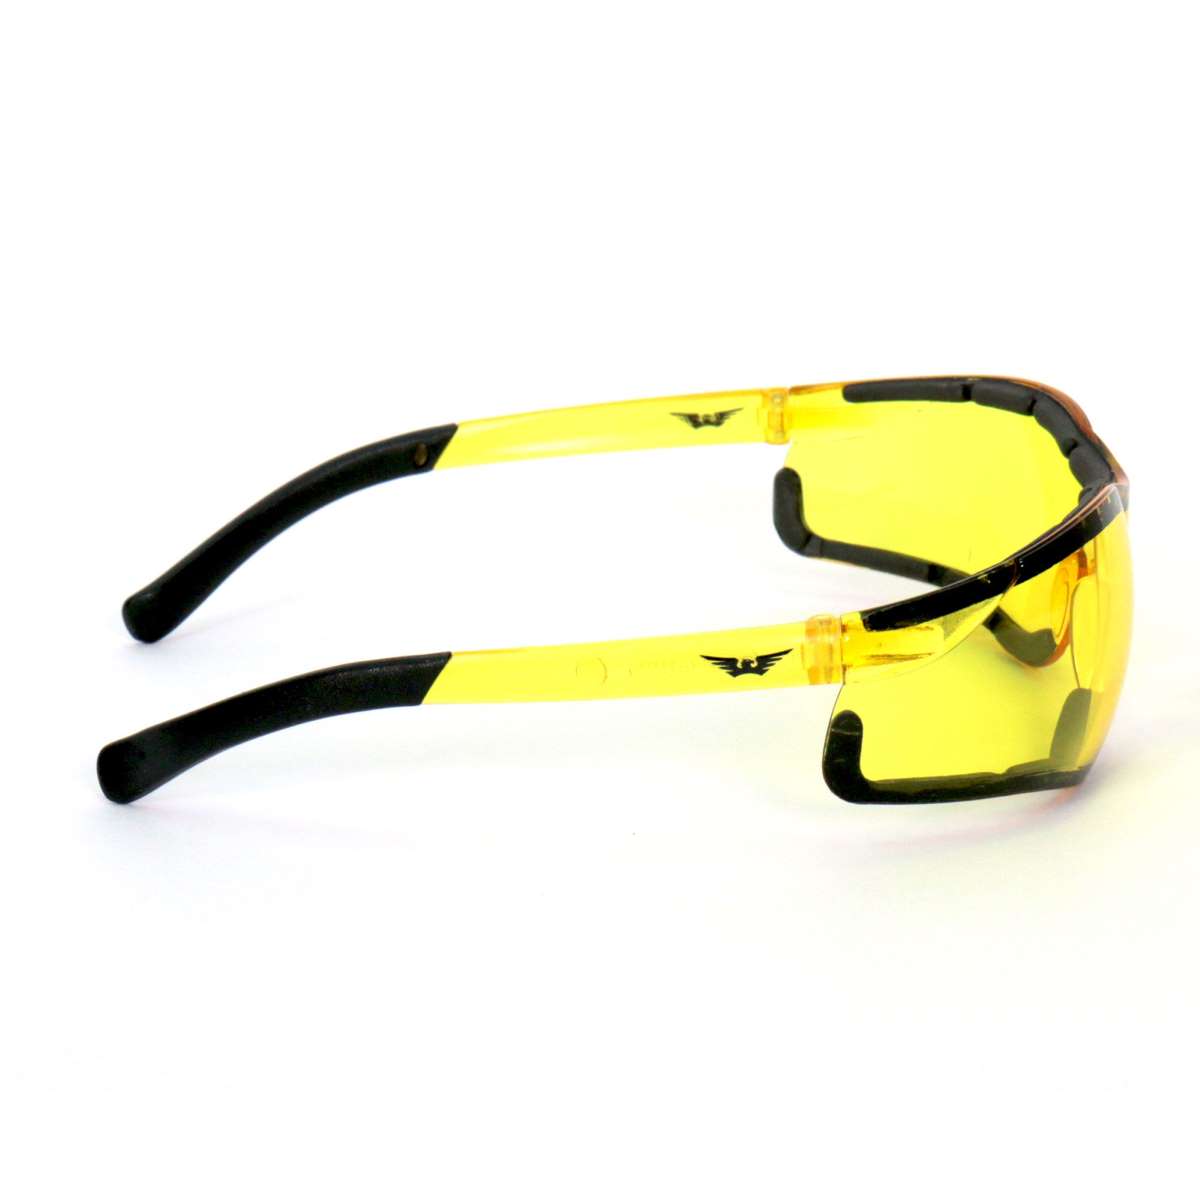 Hot Leathers Safety Wings Sunglasses with Yellow Lenses SGF1067